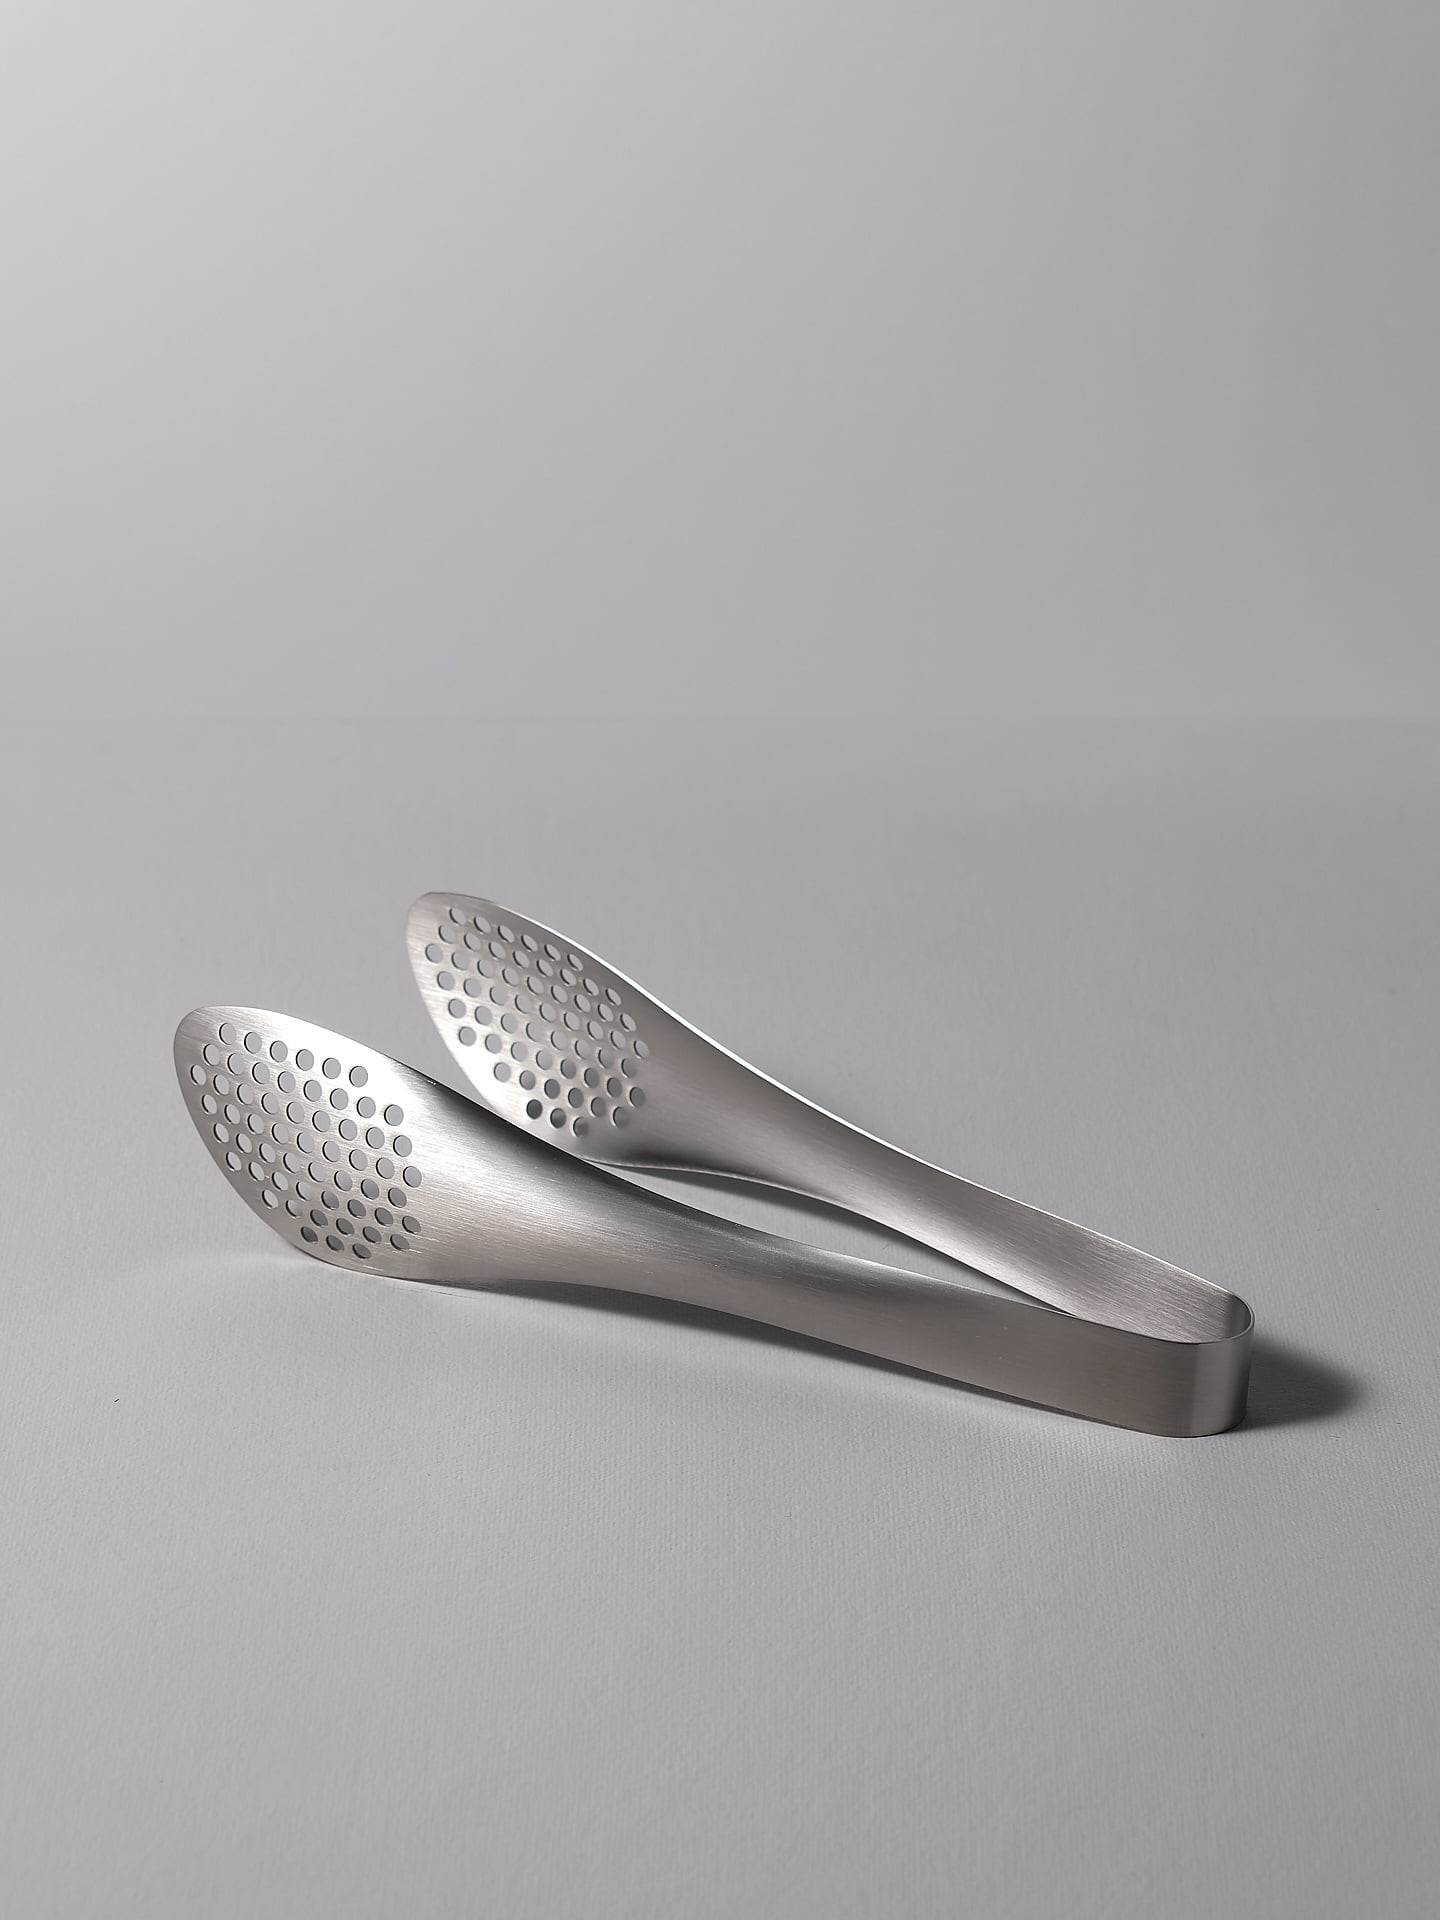 A pair of Sori Yanagi stainless steel tongs - perforated on a white surface.